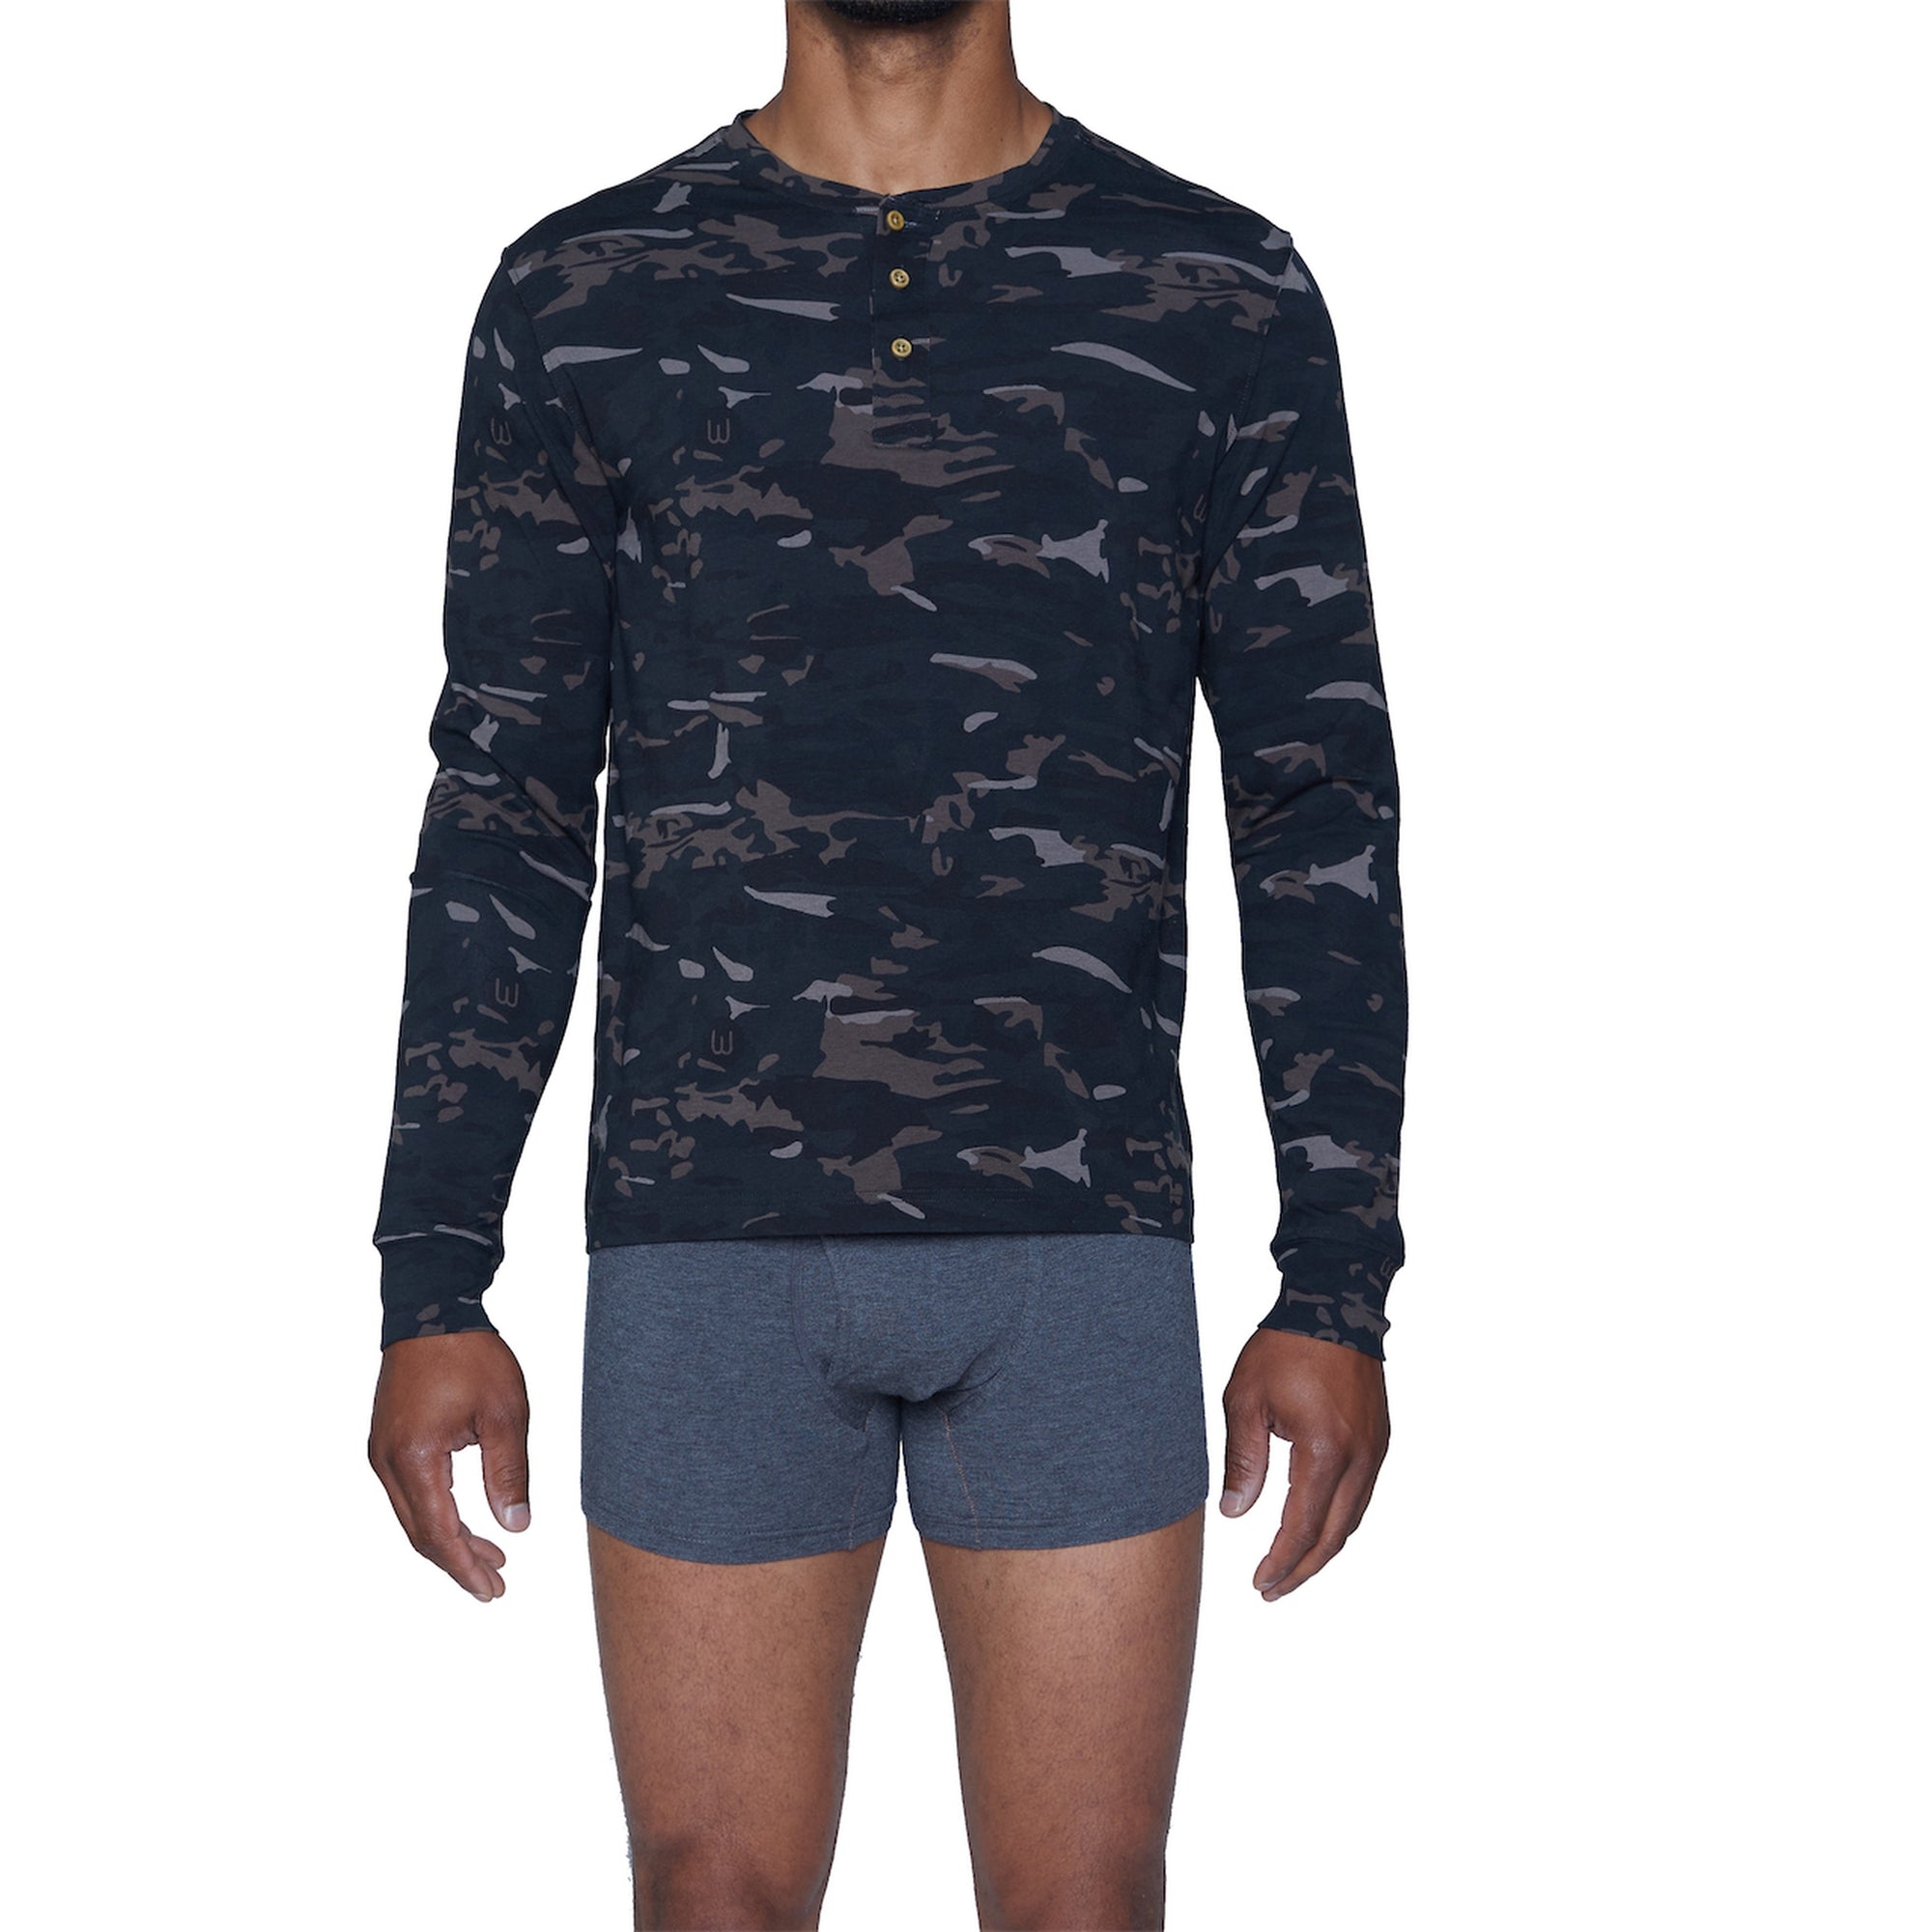 Henley Lounge Shirt in Forest Camo by Wood Underwear